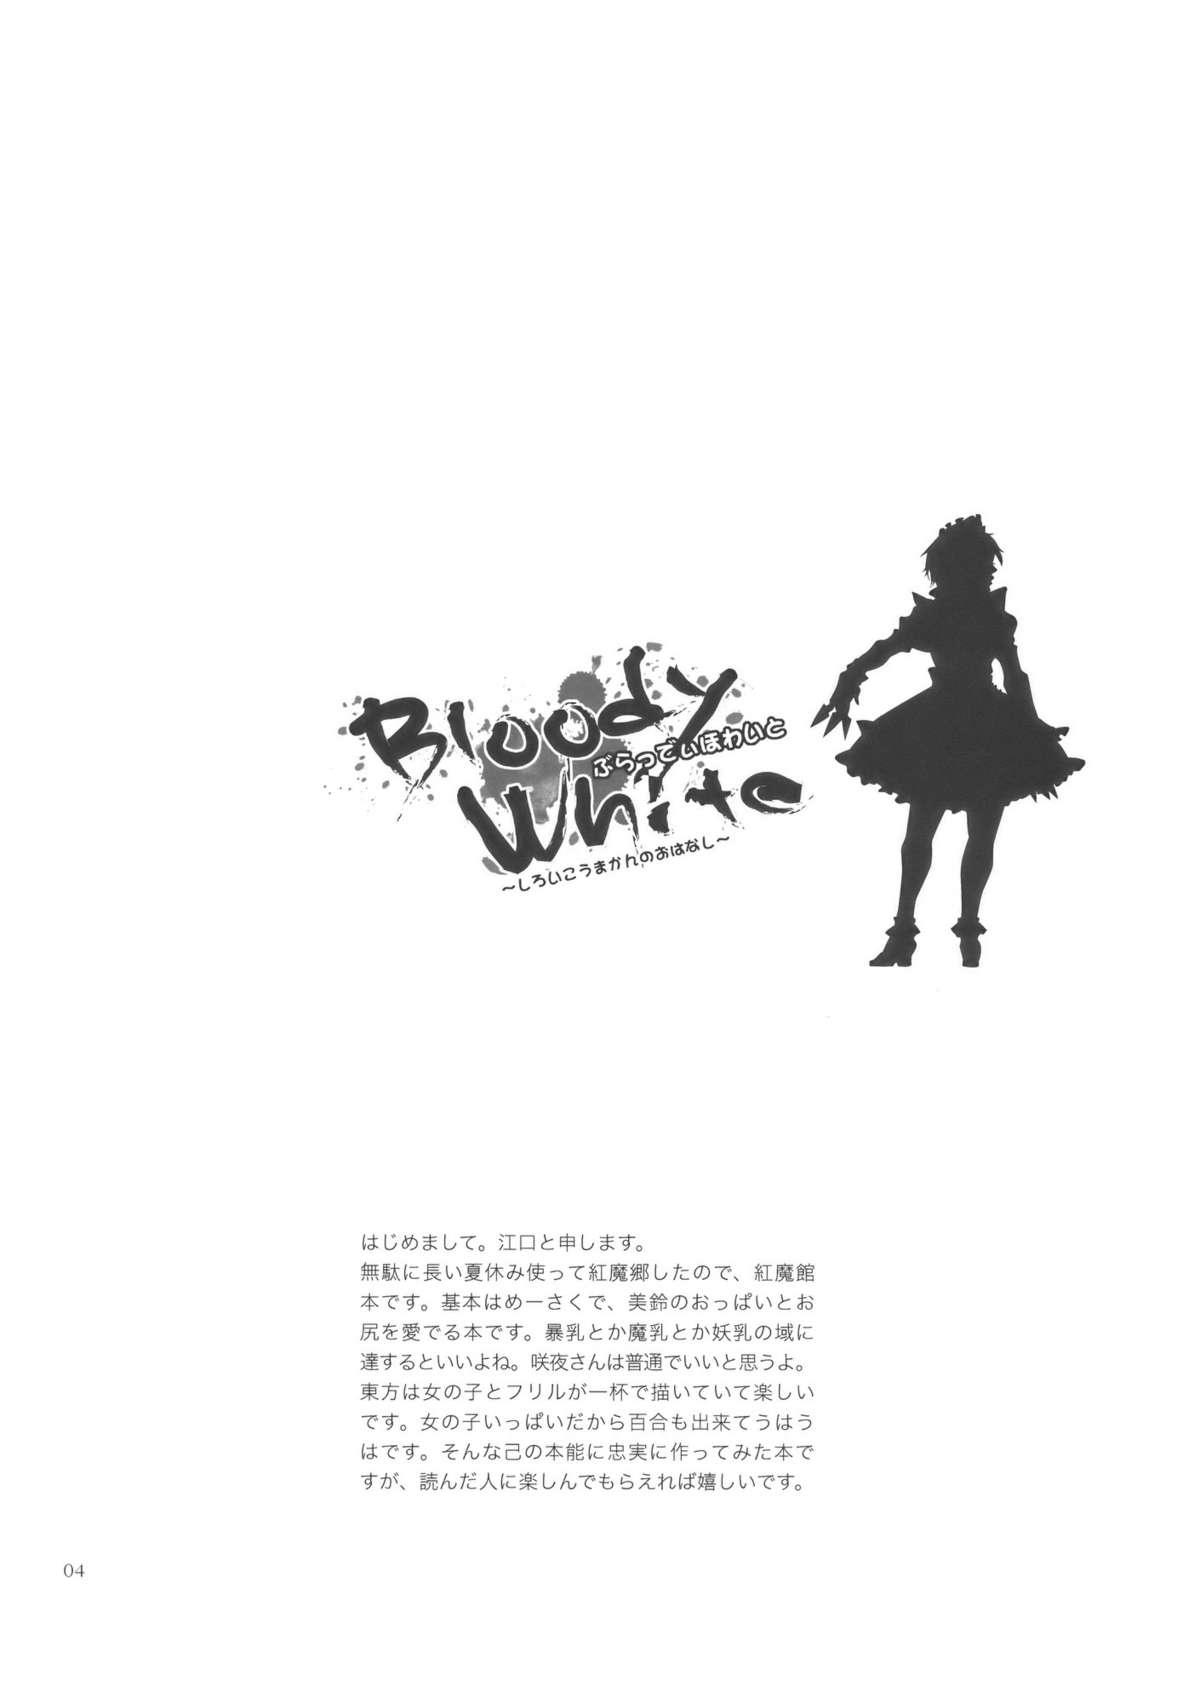 Crazy Bloody White - Touhou project Bigbooty - Page 4